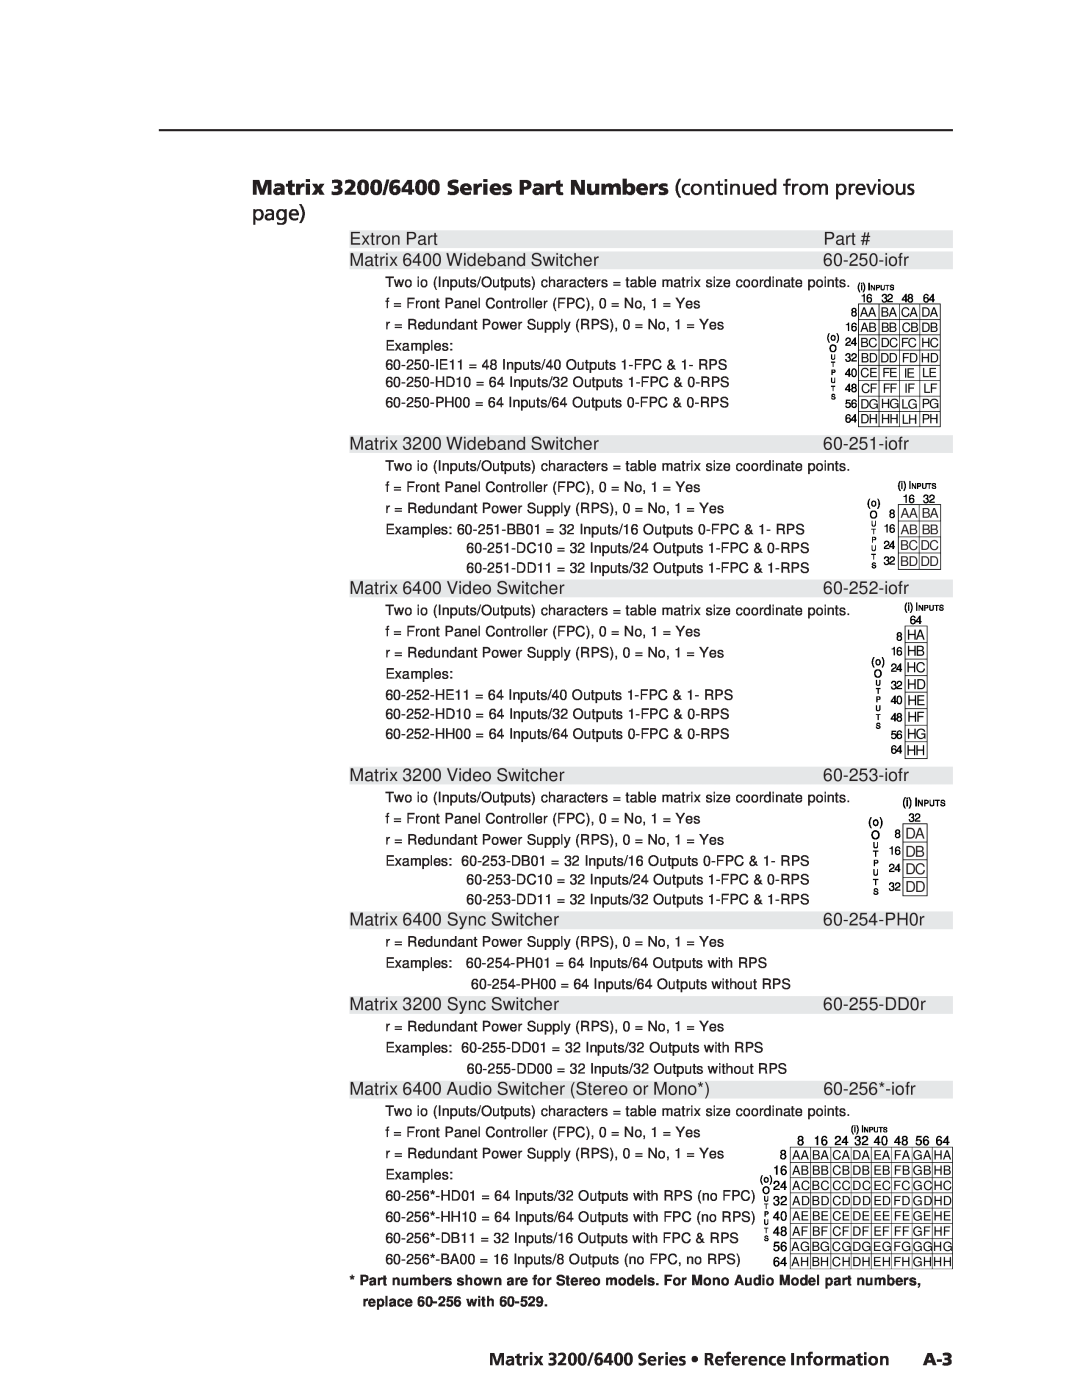 Extron electronic 3200s manual Matrix 3200/6400 Series Part Numbers continued from previous, page 